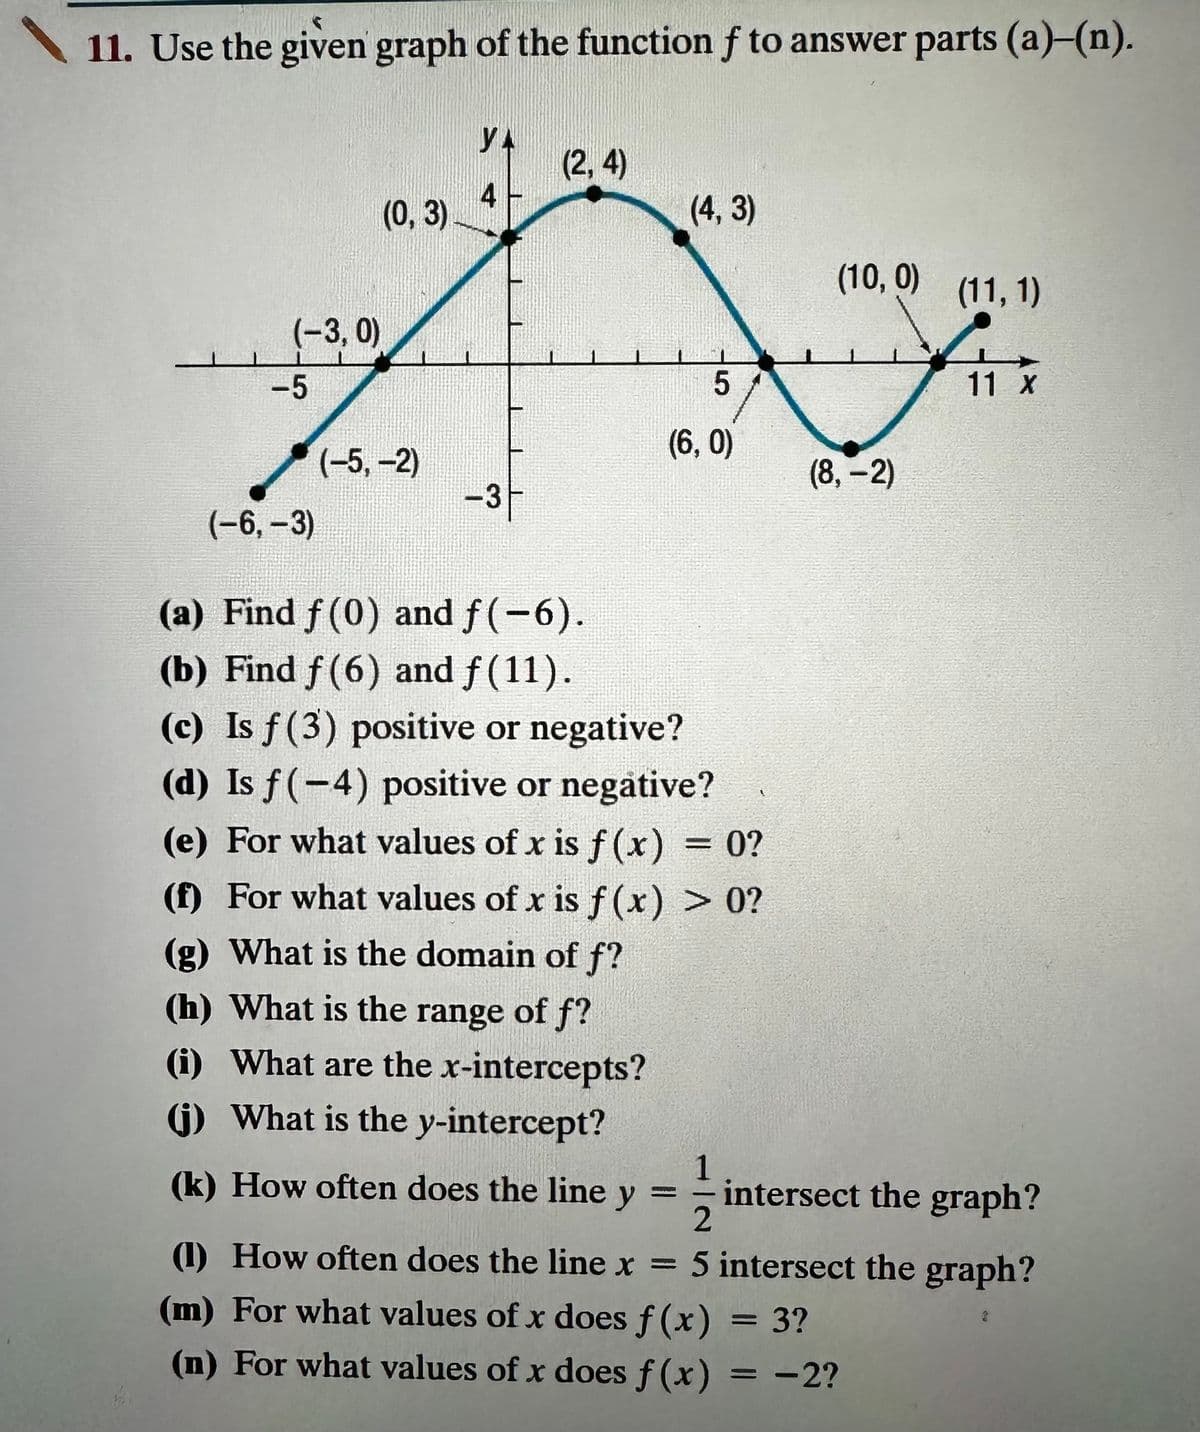 11. Use the given graph of the function f to answer parts (a)-(n).
(-3,0)
-5
(-6, -3)
(0, 3)
(-5, -2)
YA
-3-
(2, 4)
(4,3)
5
(6,0)
(a) Find f (0) and f(-6).
(b) Find f (6) and ƒ(11).
(c) Is f(3) positive or negative?
(d) Is f(-4) positive or negative?
(e) For what values of x is f(x) = 0?
(f) For what values of x is f (x) > 0?
(g) What is the domain of f?
(h) What is the range of f?
(i) What are the x-intercepts?
(j) What is the y-intercept?
(k) How often does the line y
(10,0)
-
(11, 1)
für
11 X
(8,-2)
intersect the graph?
2
(1) How often does the line x = 5 intersect the graph?
(m) For what values of x does f(x) = 3?
(n) For what values of x does f(x) = -2?